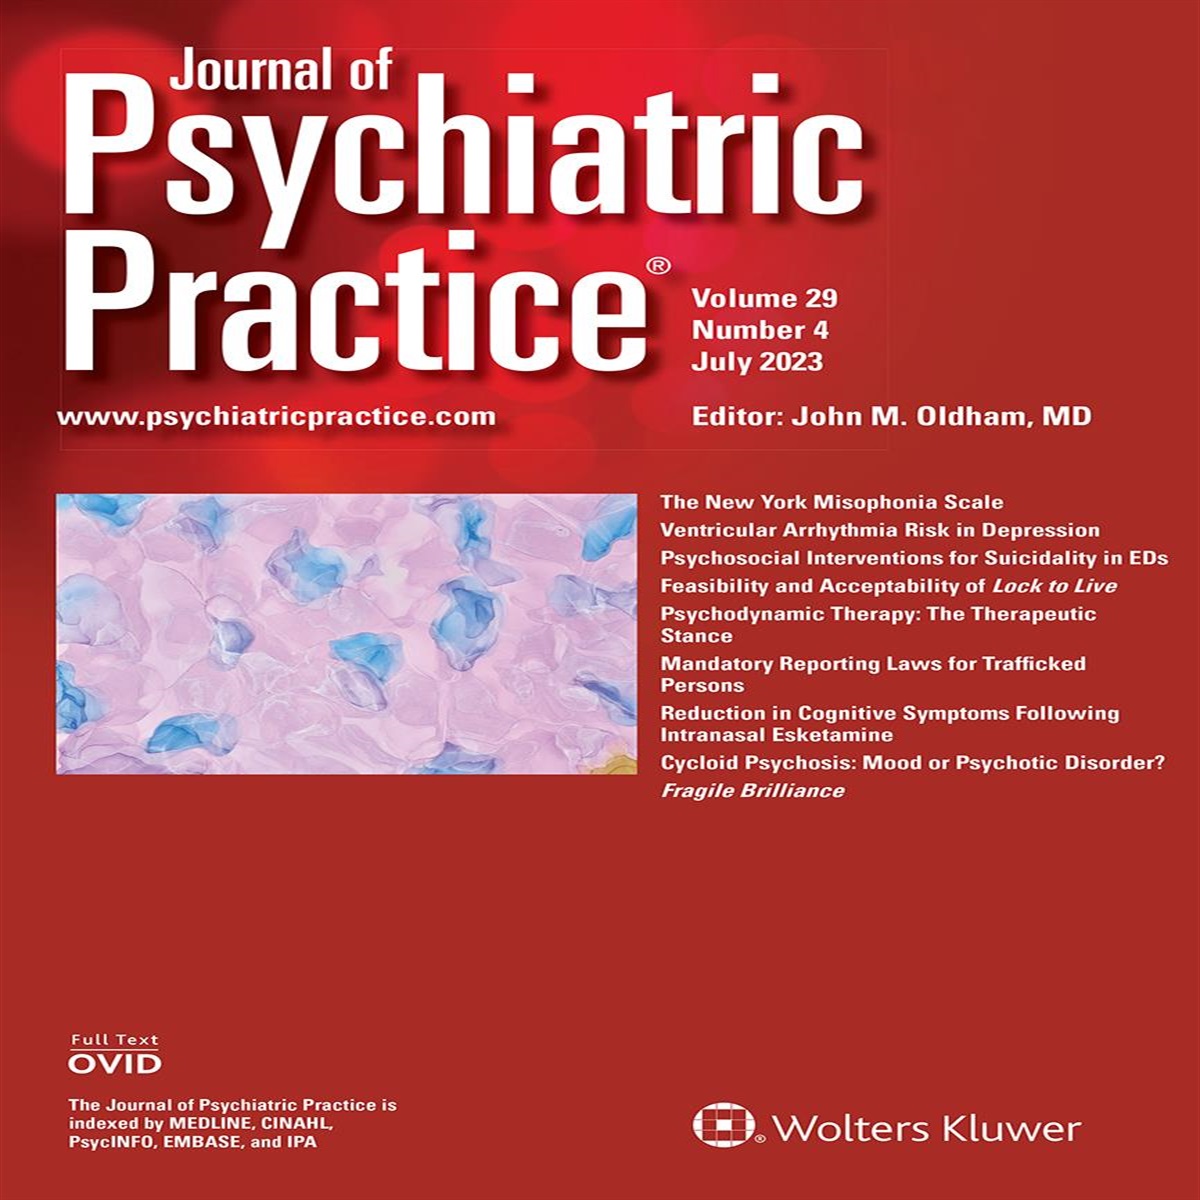 Psychodynamic Therapy: An Overview for Trainees and Their Teachers: Part 2—The Therapeutic Stance